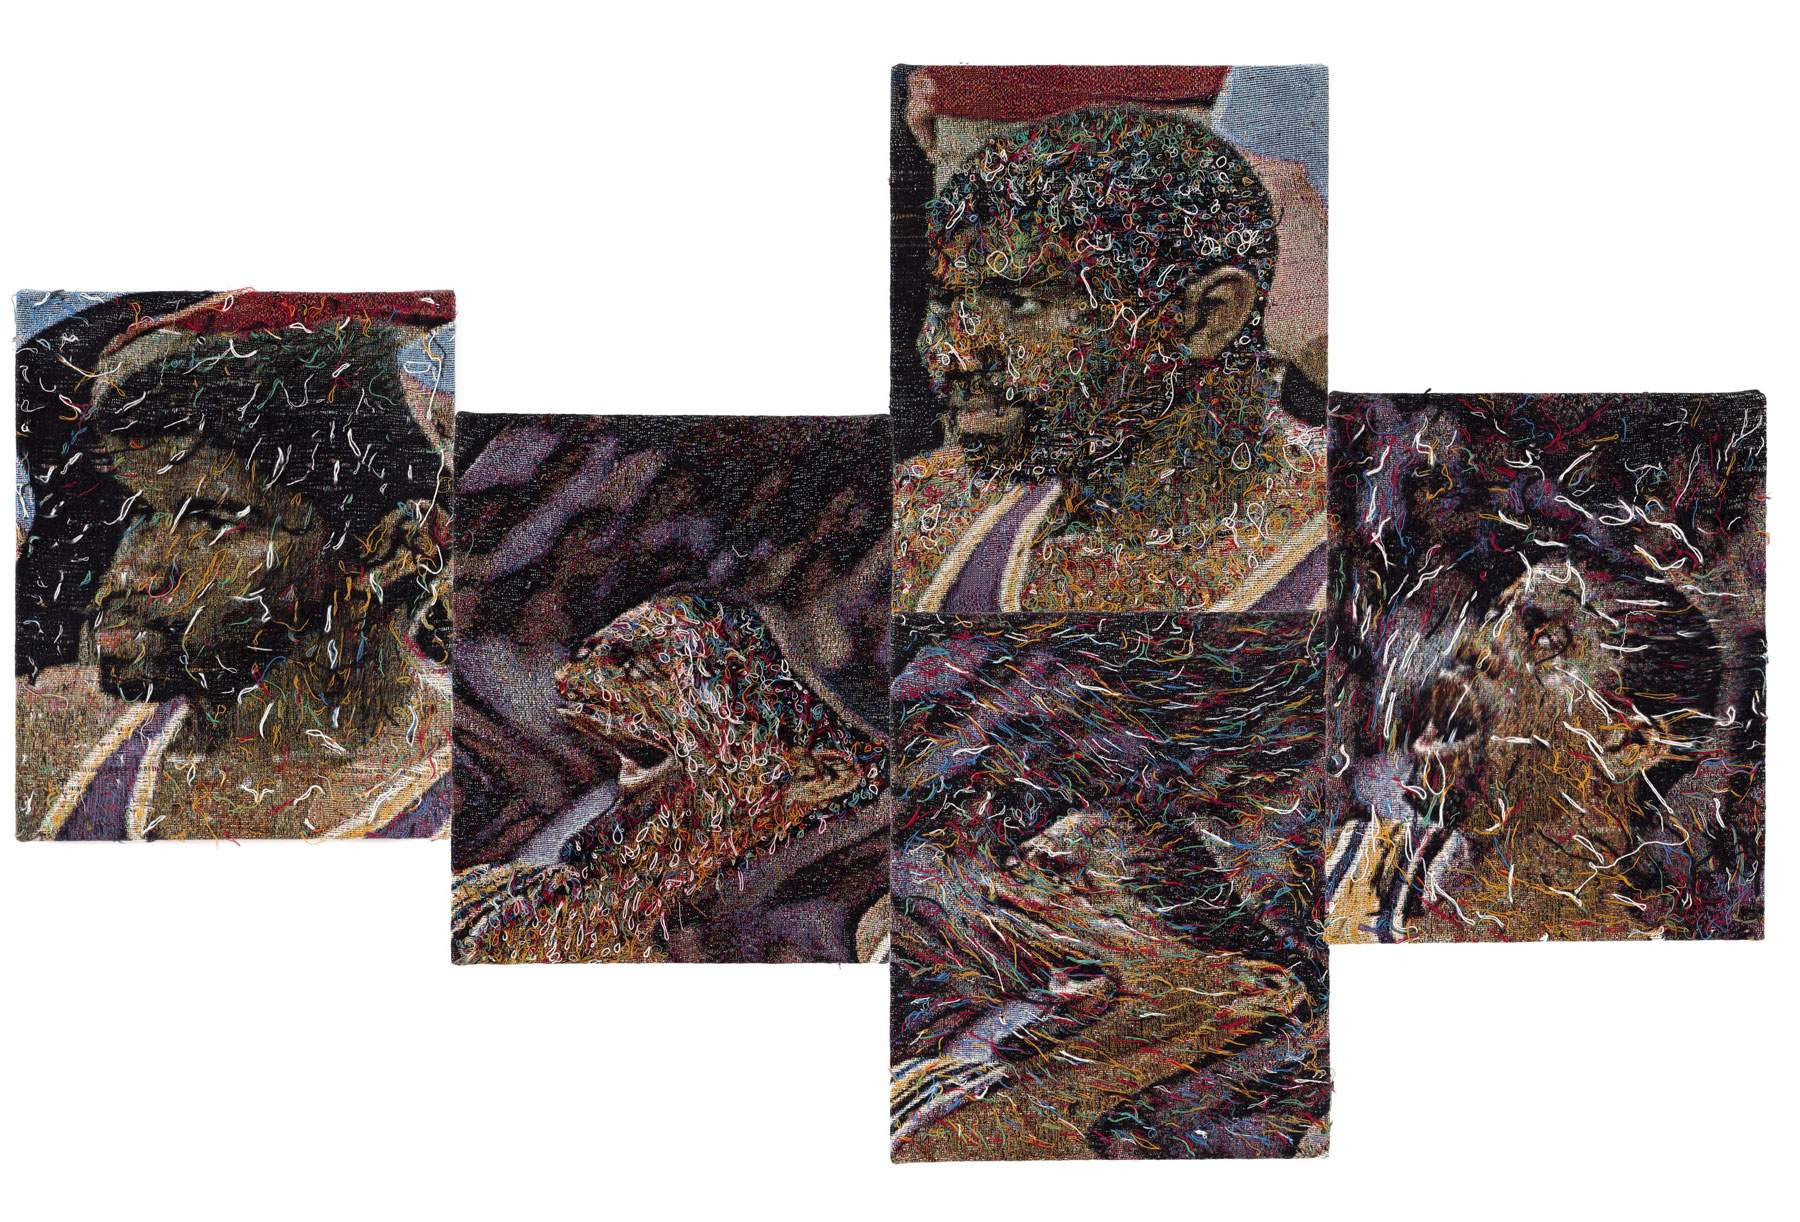 Milan exhibition of Noel W.'s tapestries. Anderson on the distorted narrative of black identity